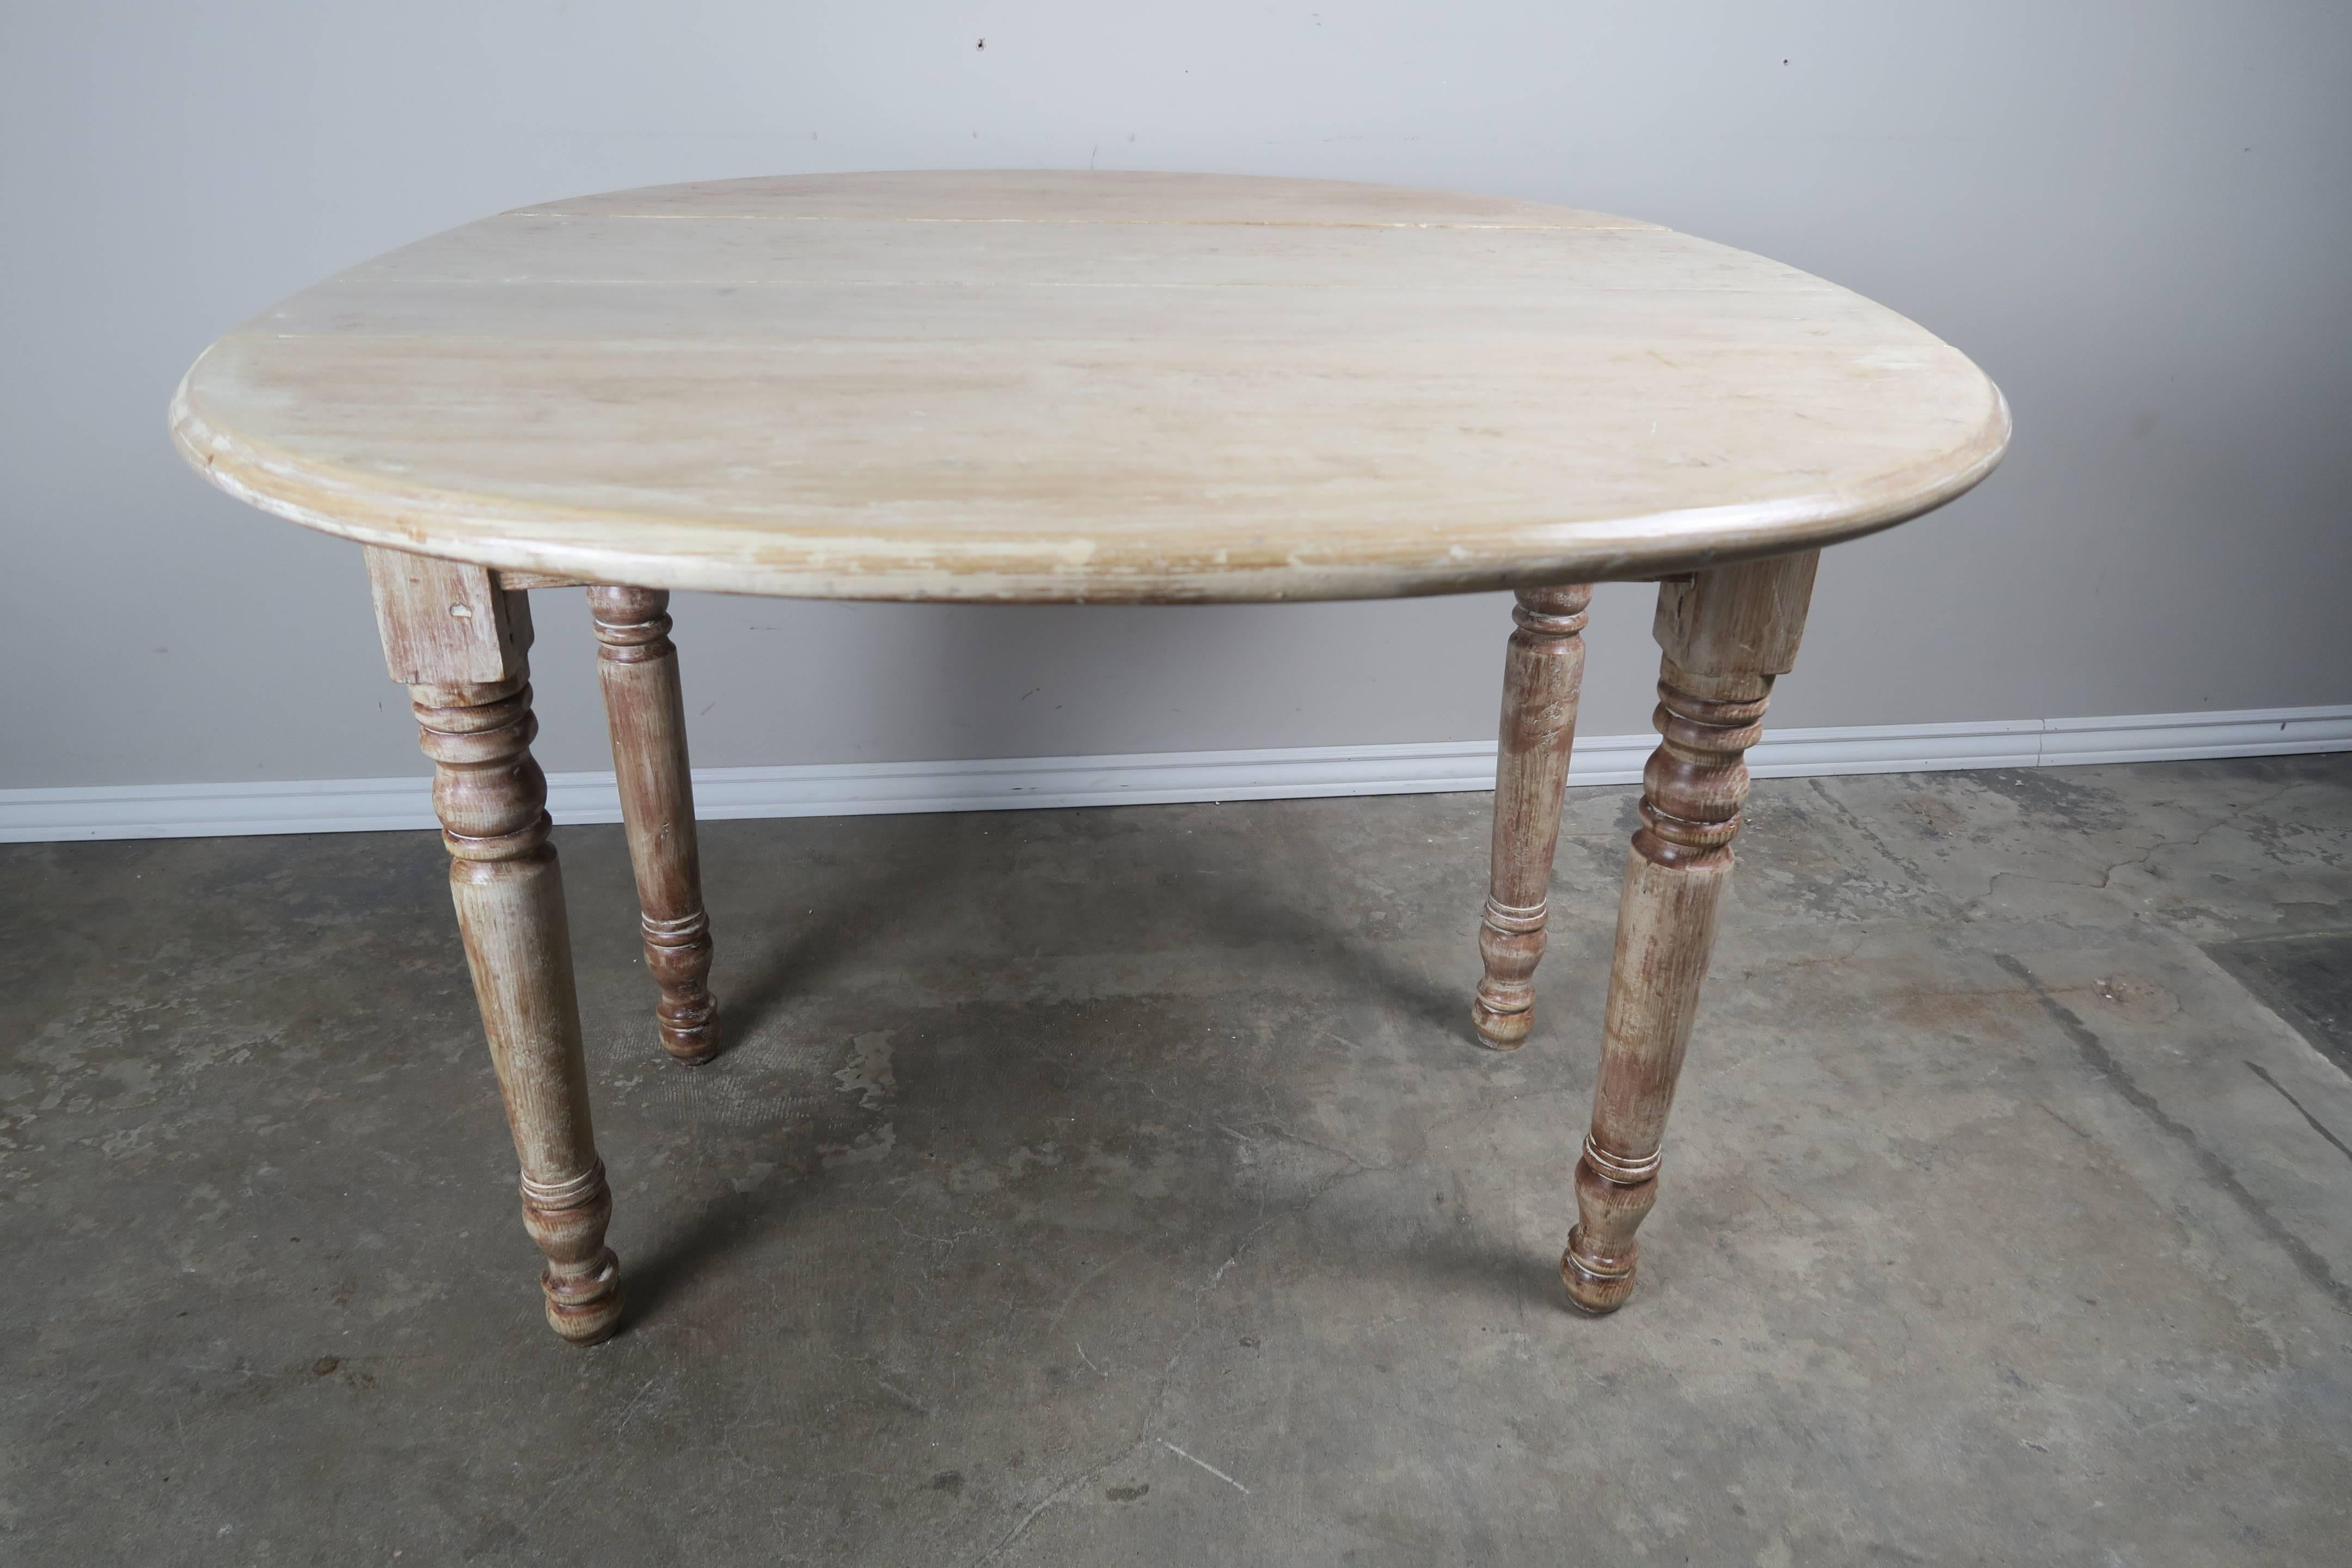 Late 19th Century English Drop-Leaf Table with Natural Washed Finish